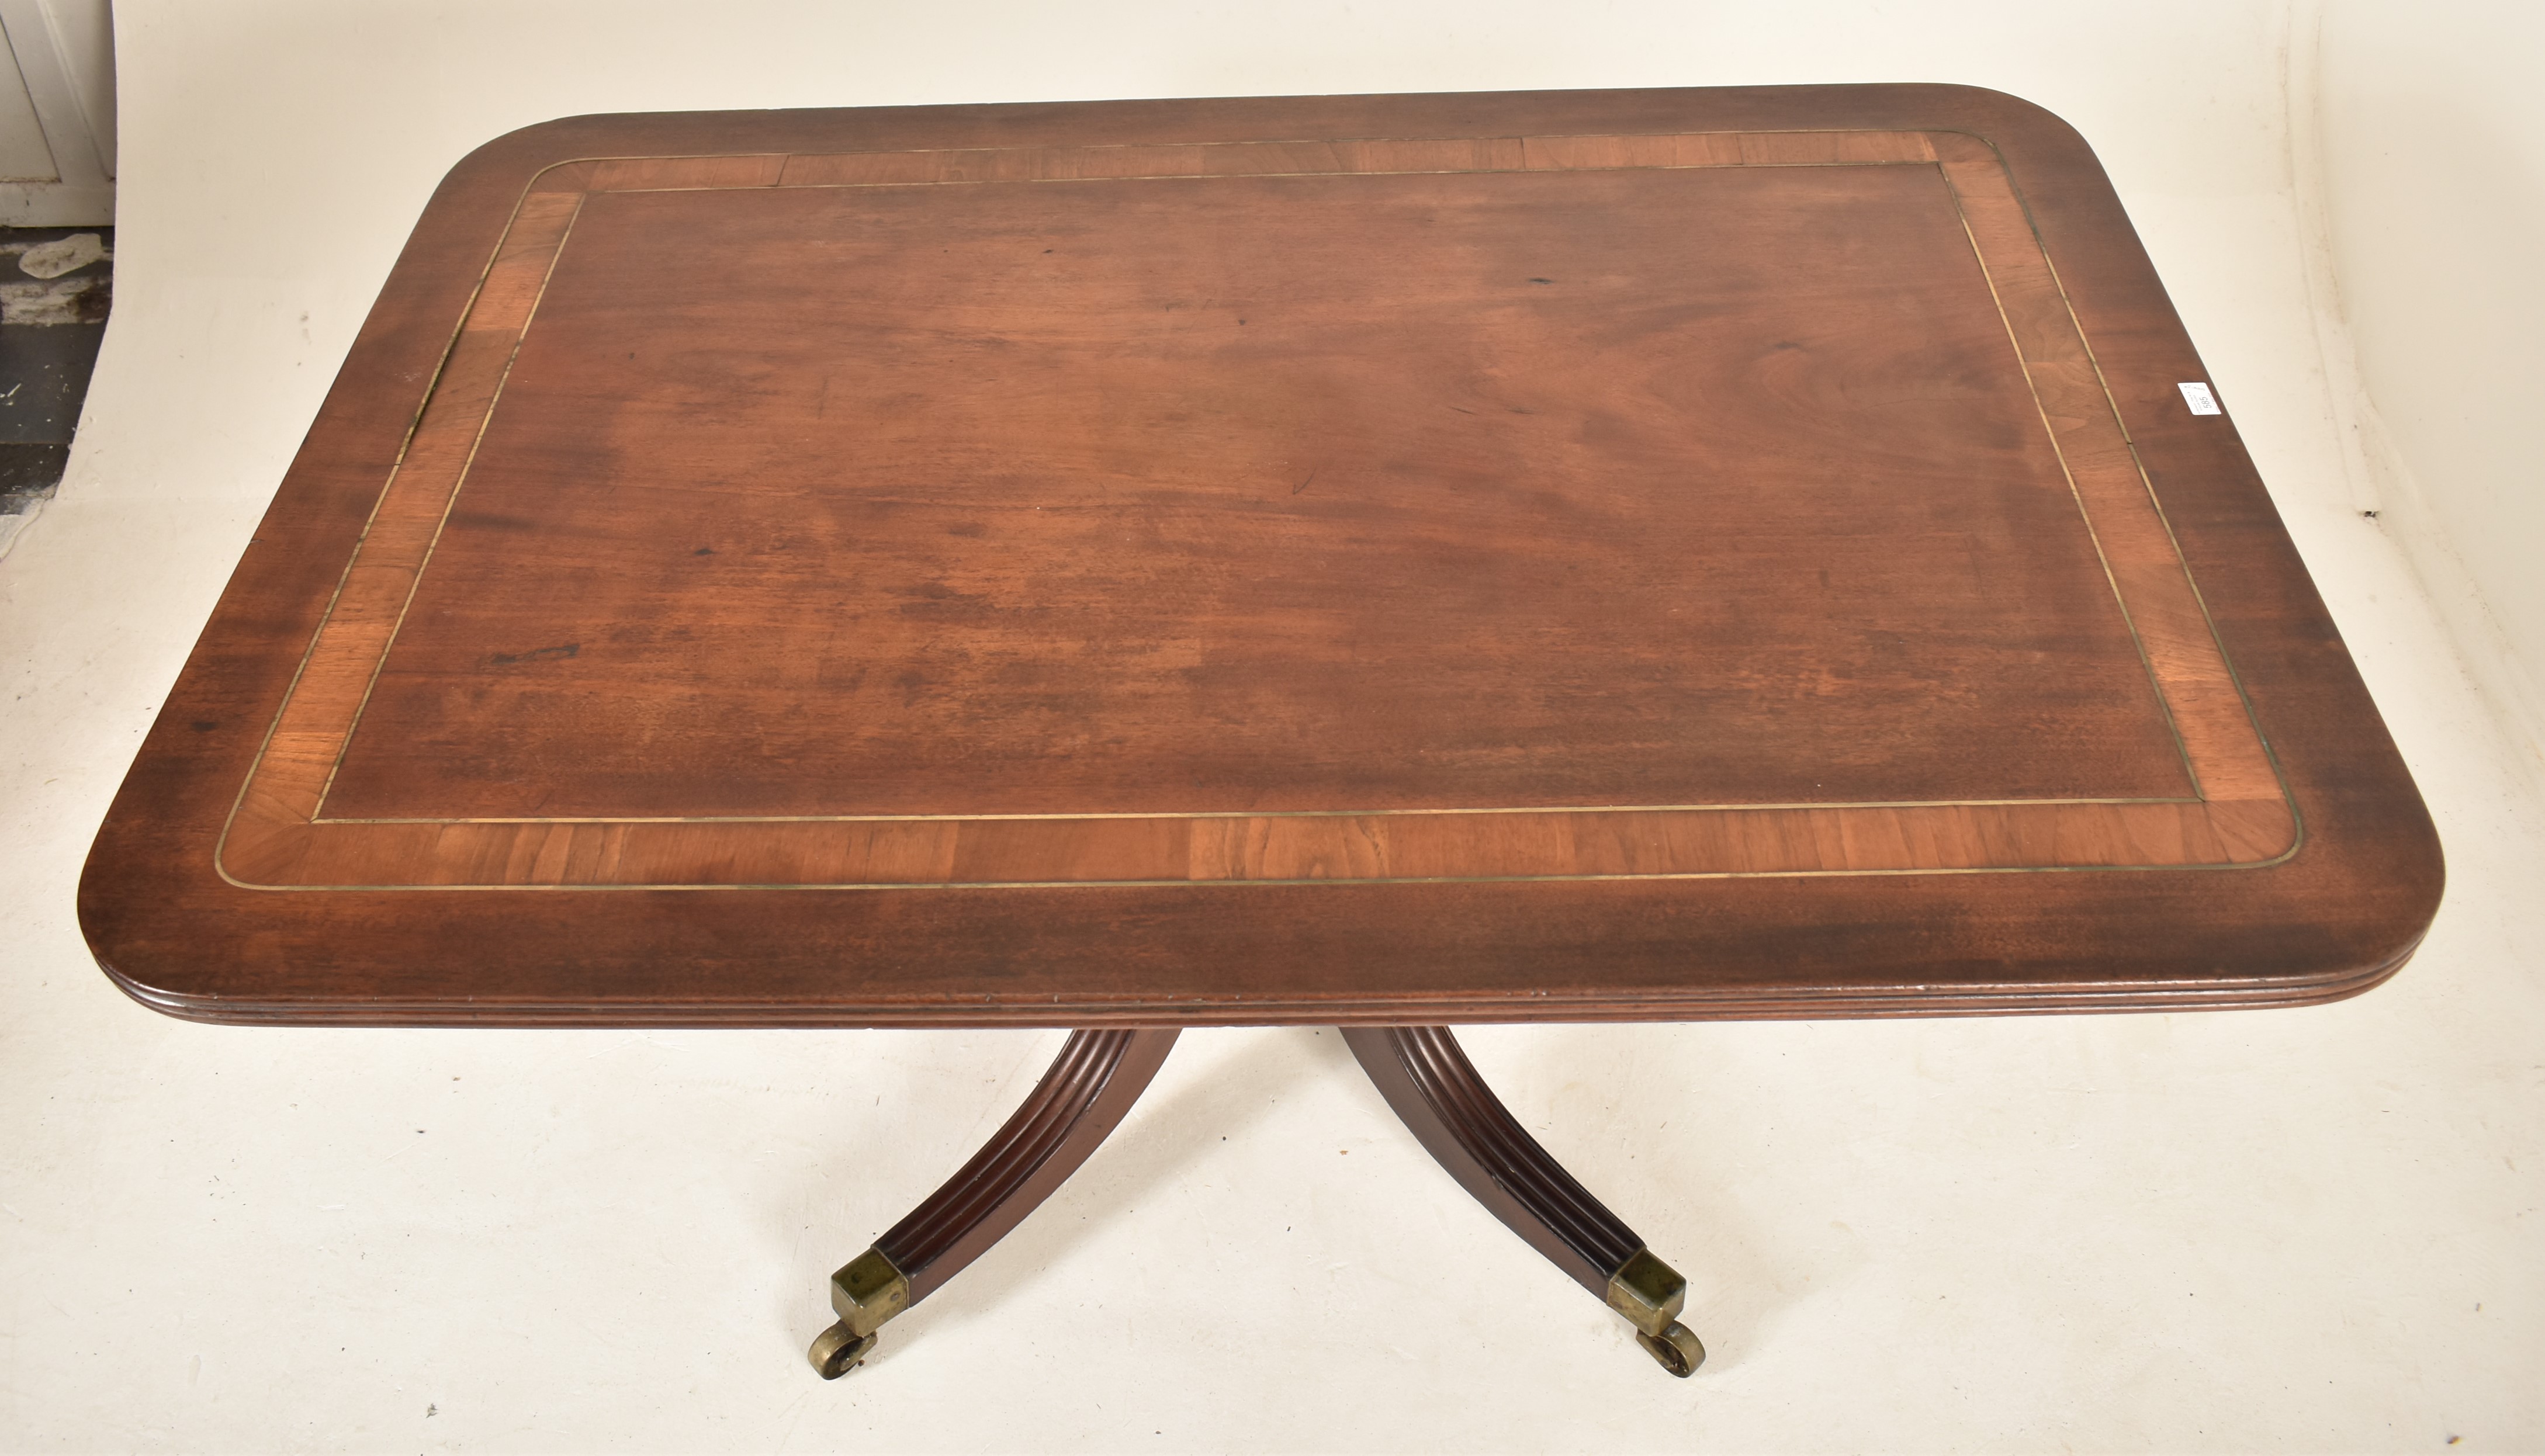 REGENCY 19TH CENTURY MAHOGANY TILT TOP DINING TABLE WITH CHAIRS - Image 2 of 10